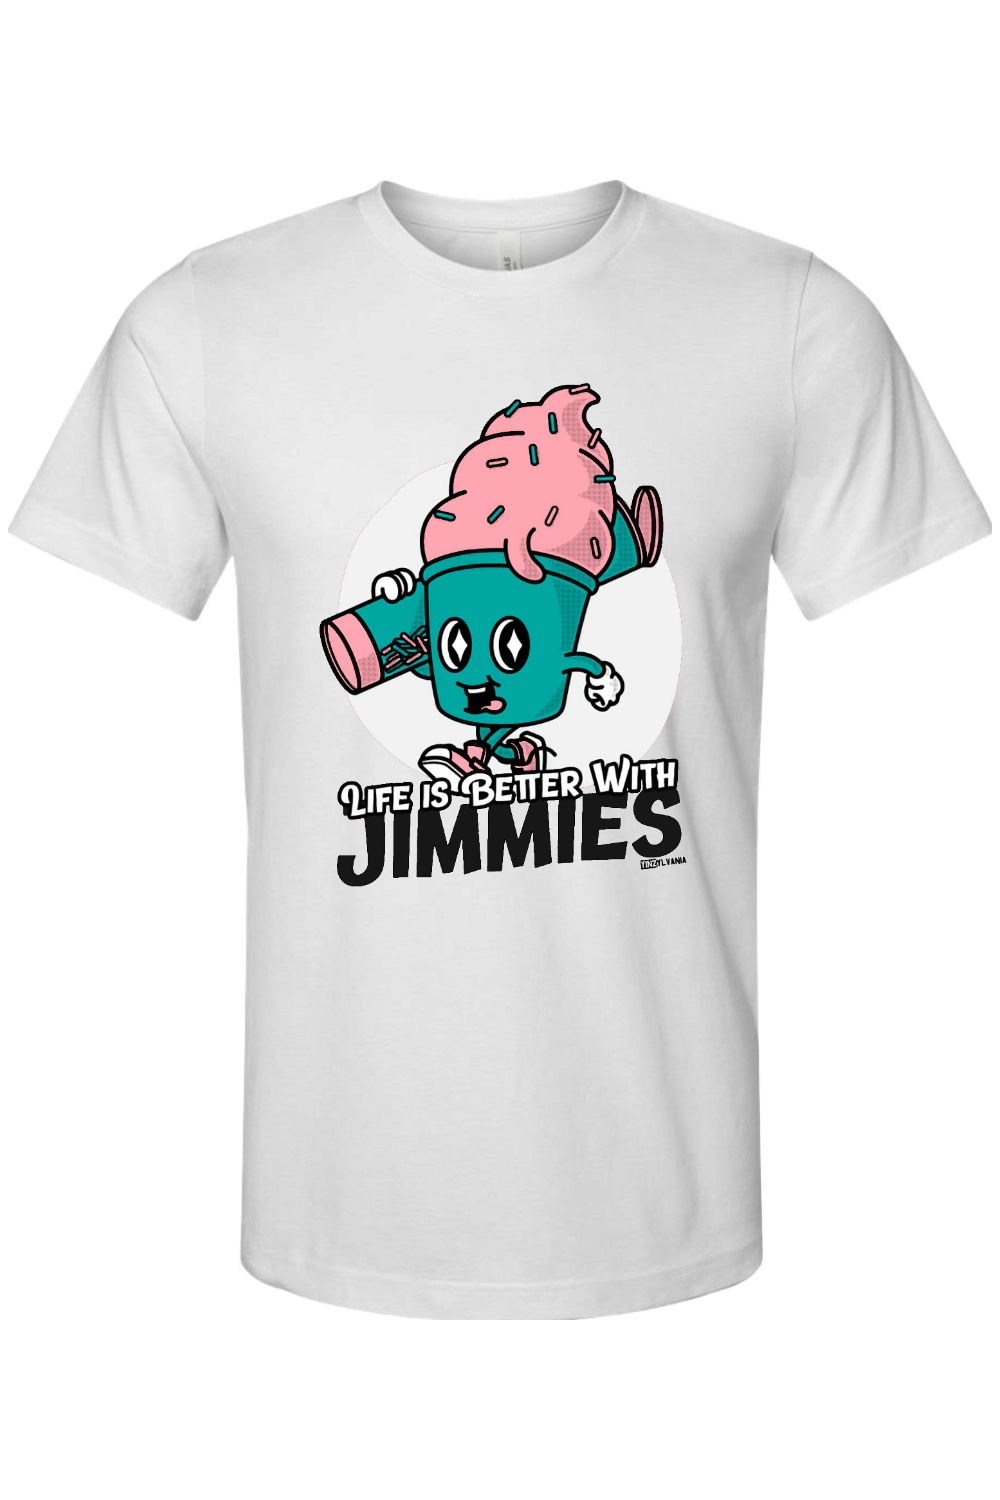 Life is Better with Jimmies - Bella + Canvas Jersey Tee - Yinzylvania